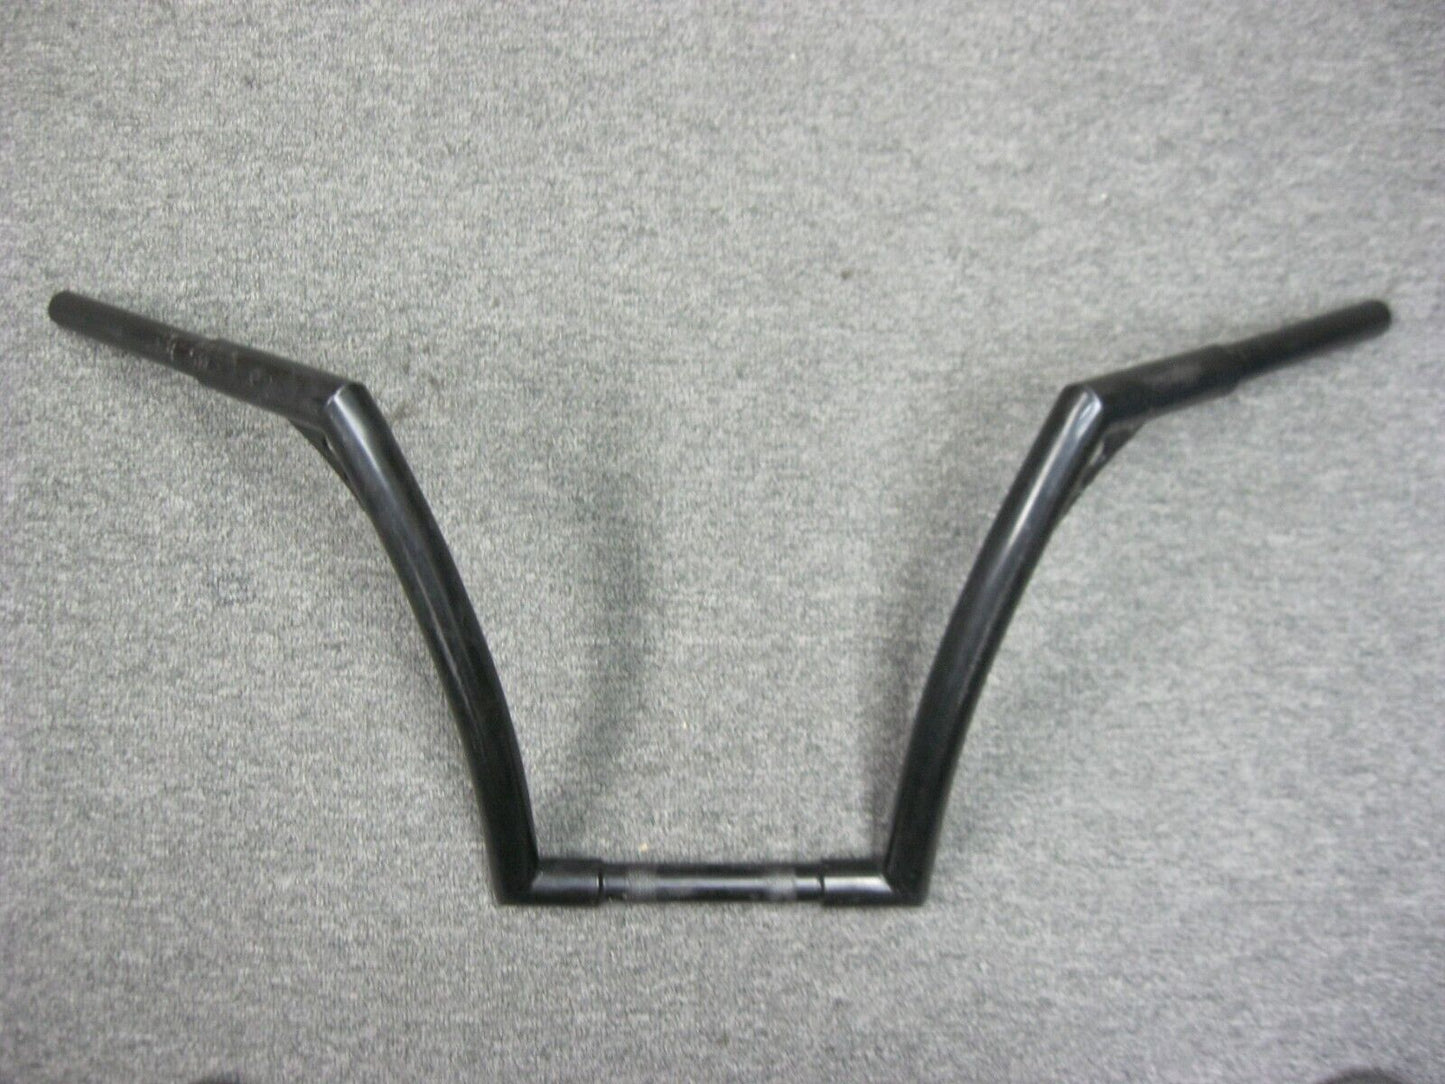 Handlebars 14" Rise 1 1/4 Dia. Black for Harley Davidson Models Fly By Wire